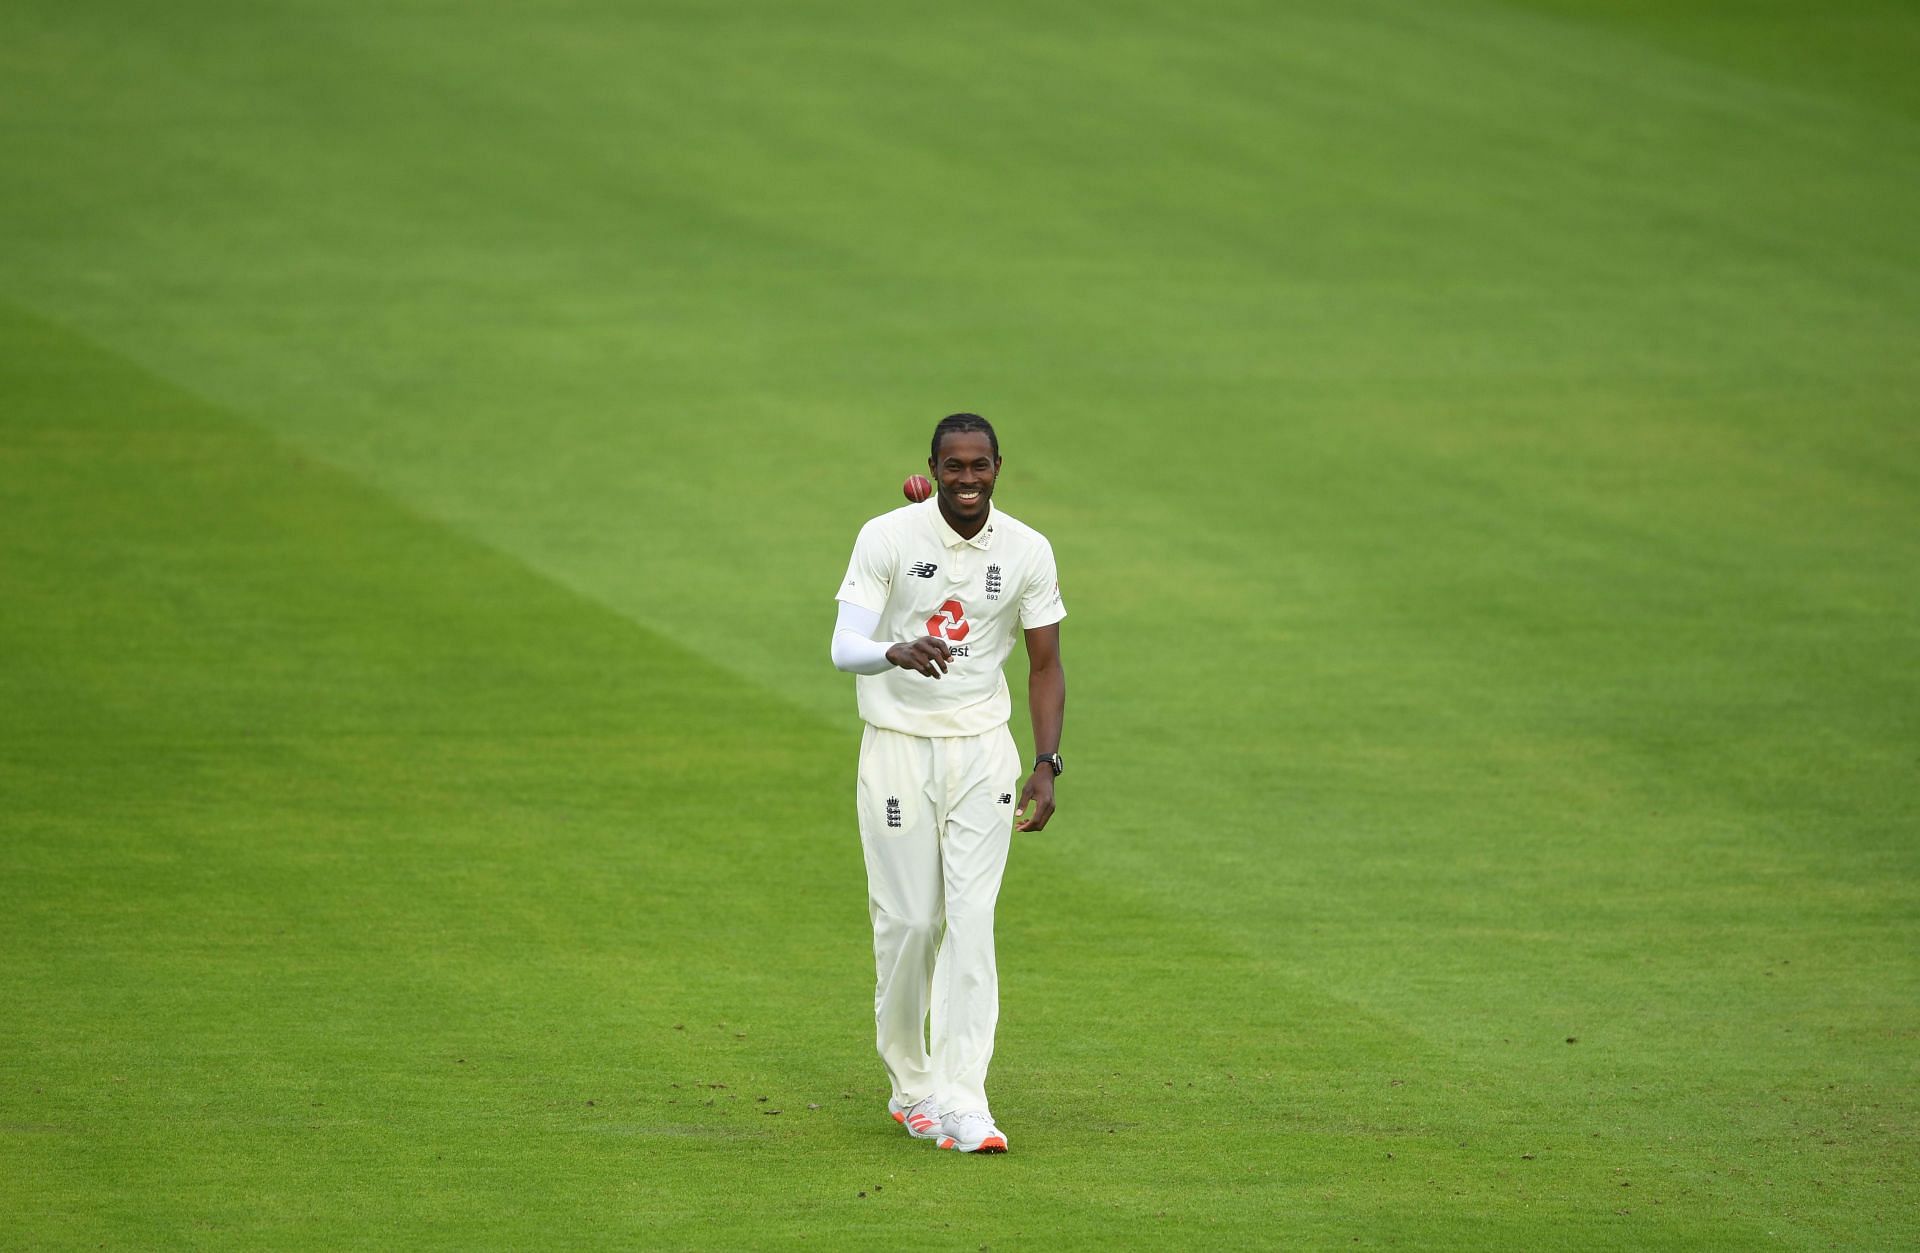 Jofra Archer has played both for and against West Indies